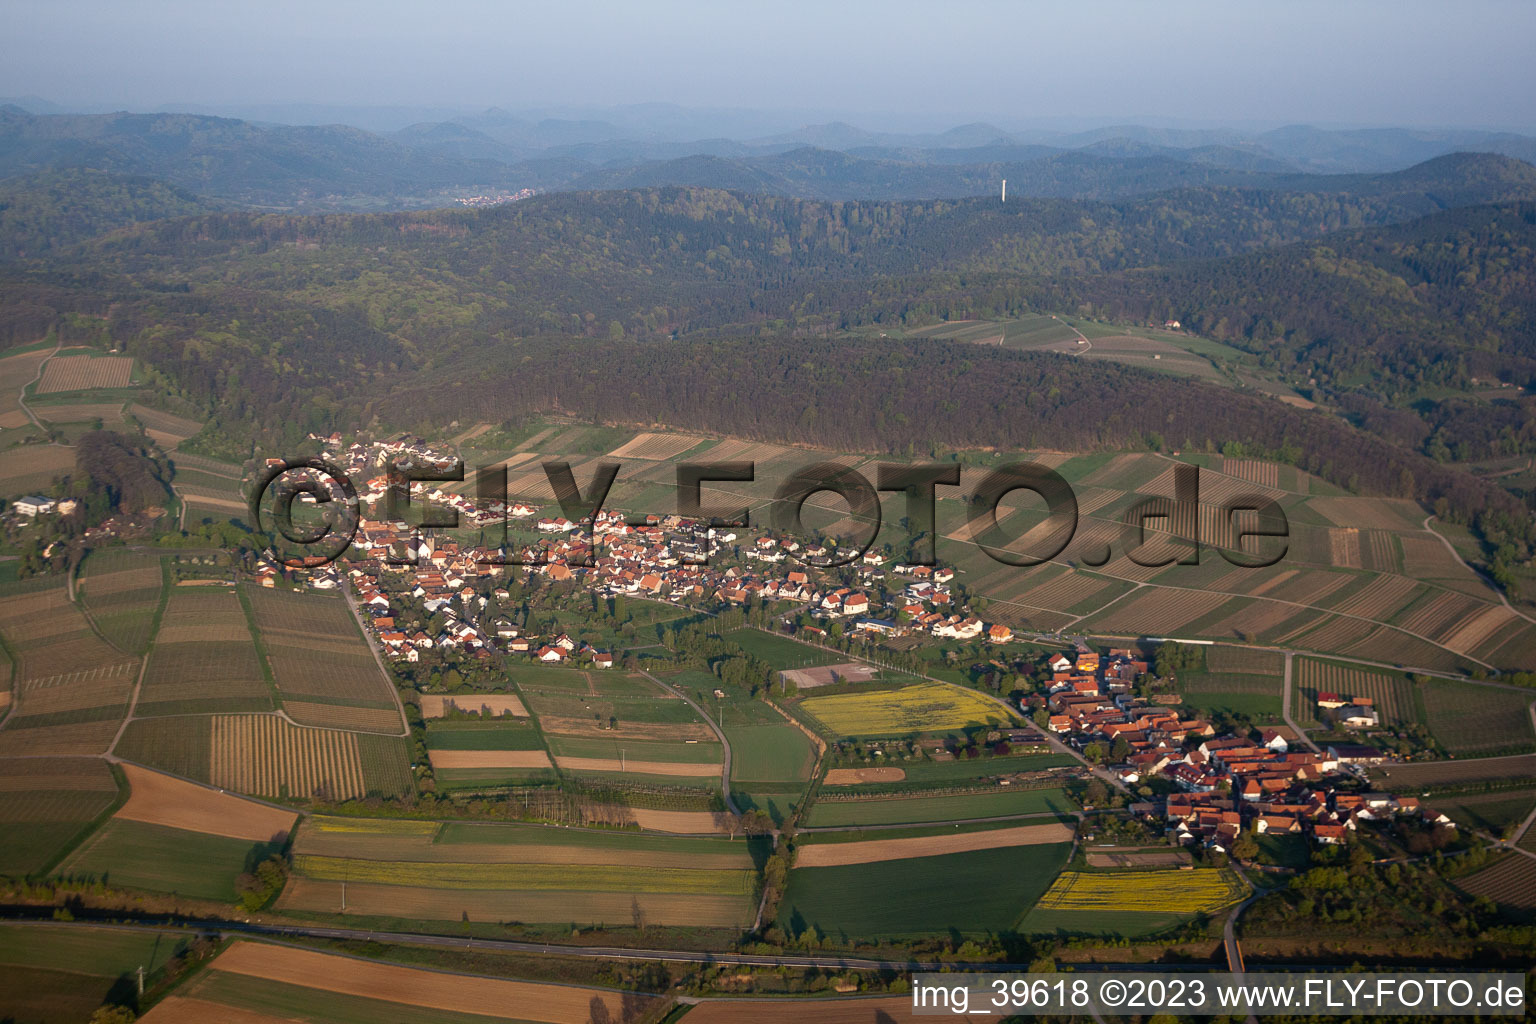 District Pleisweiler in Pleisweiler-Oberhofen in the state Rhineland-Palatinate, Germany viewn from the air